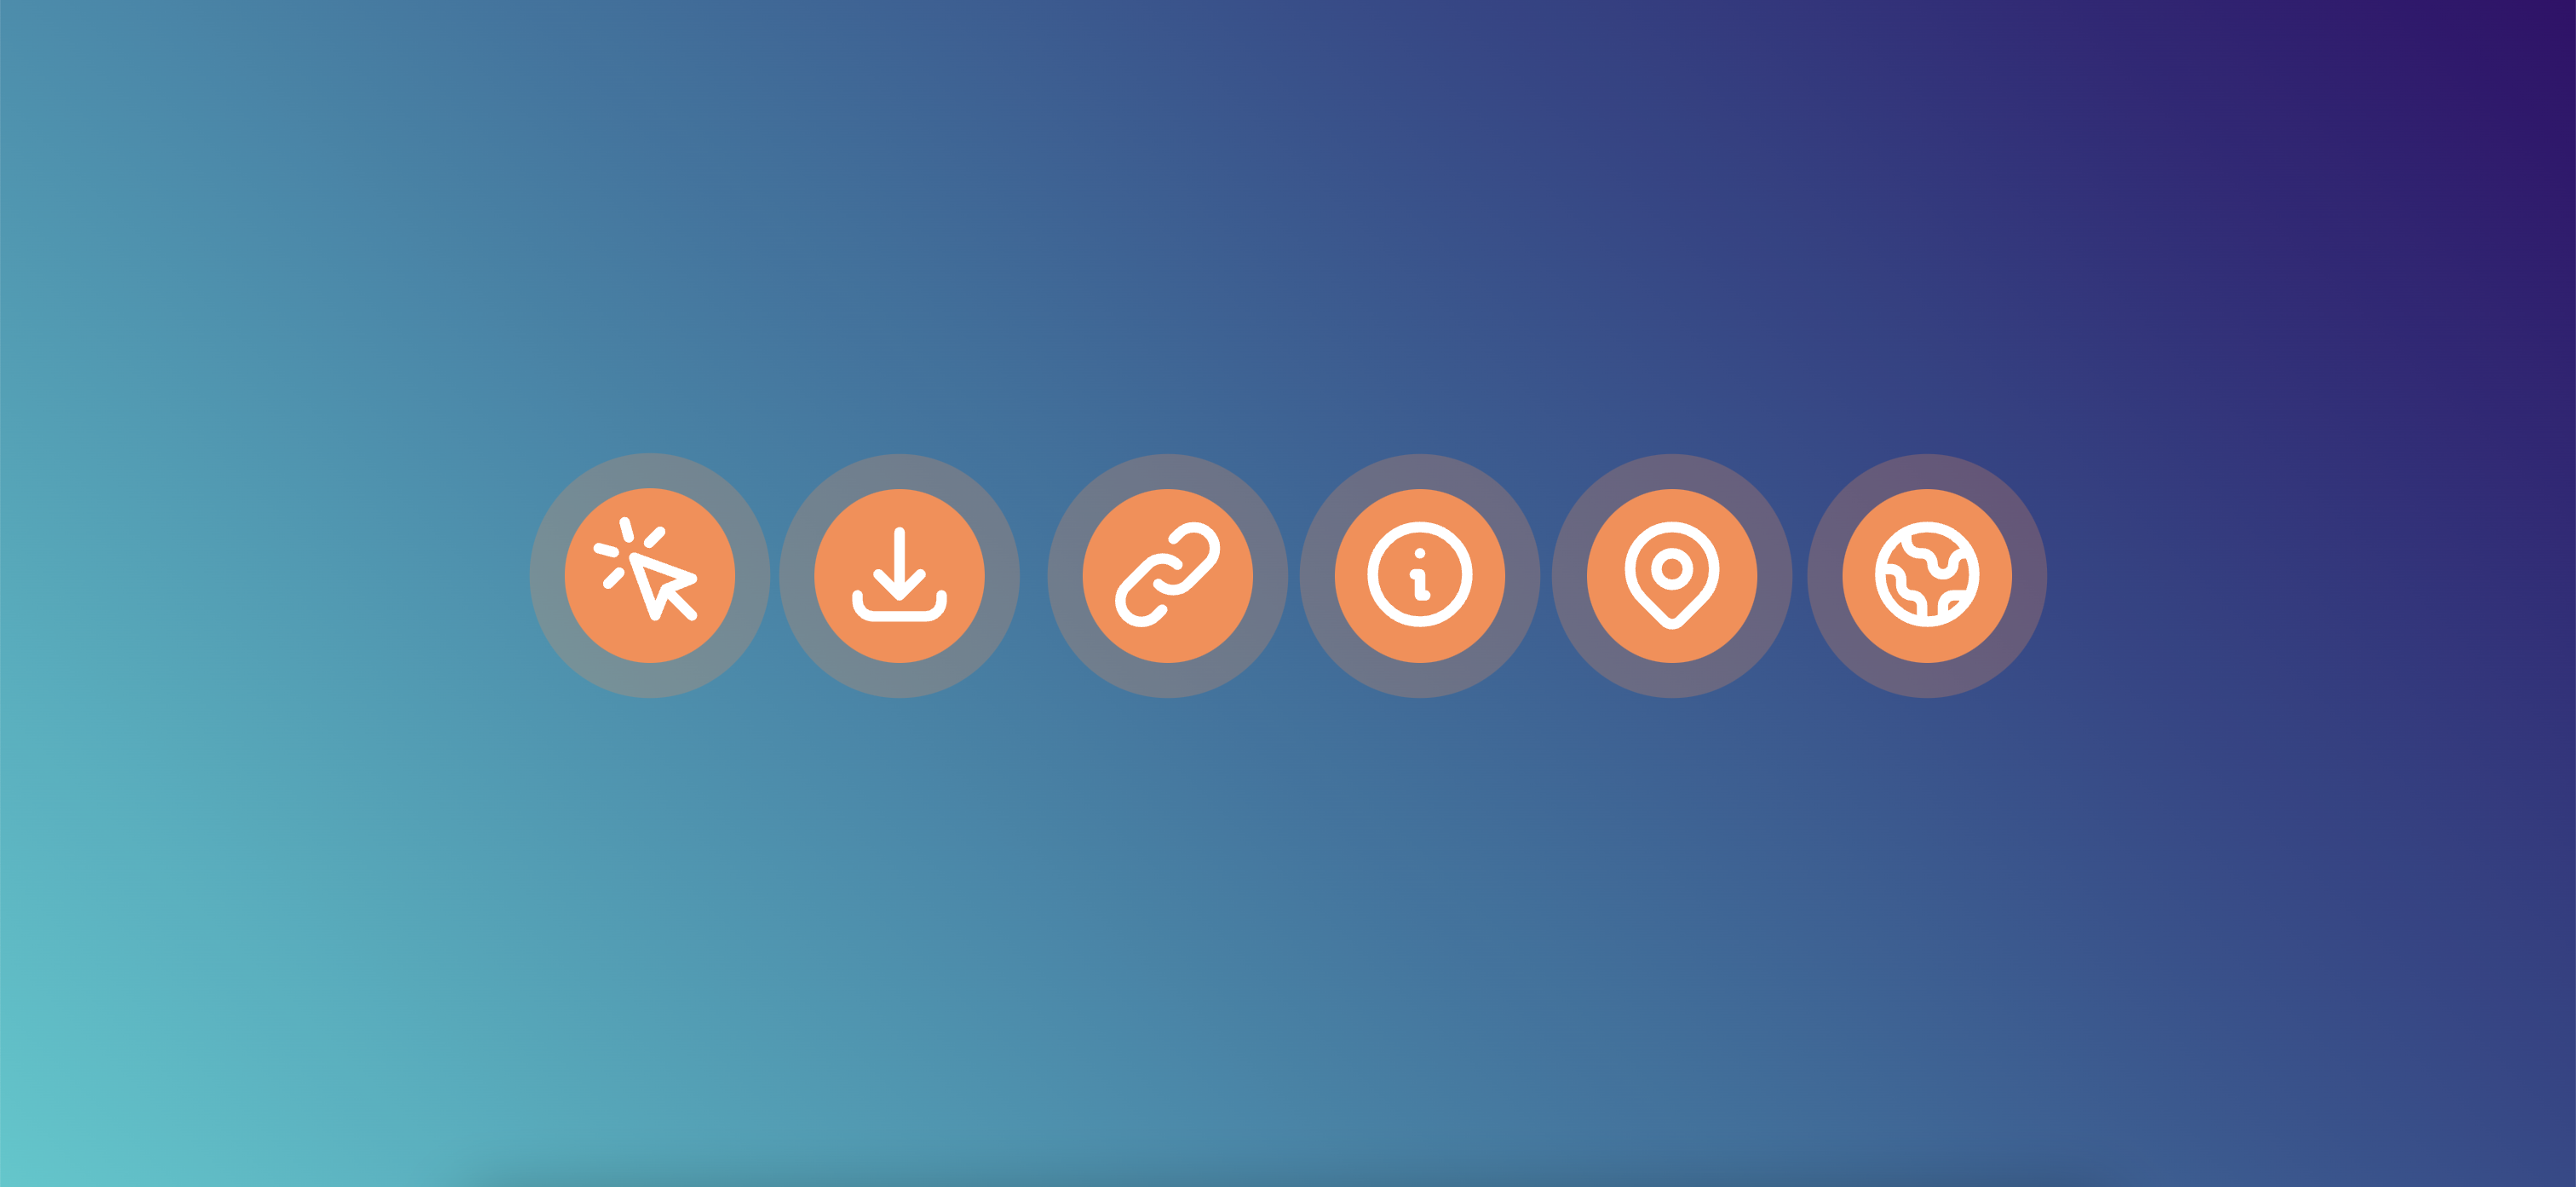 Spot now includes a selection of icons & new pulse animation for overlays
